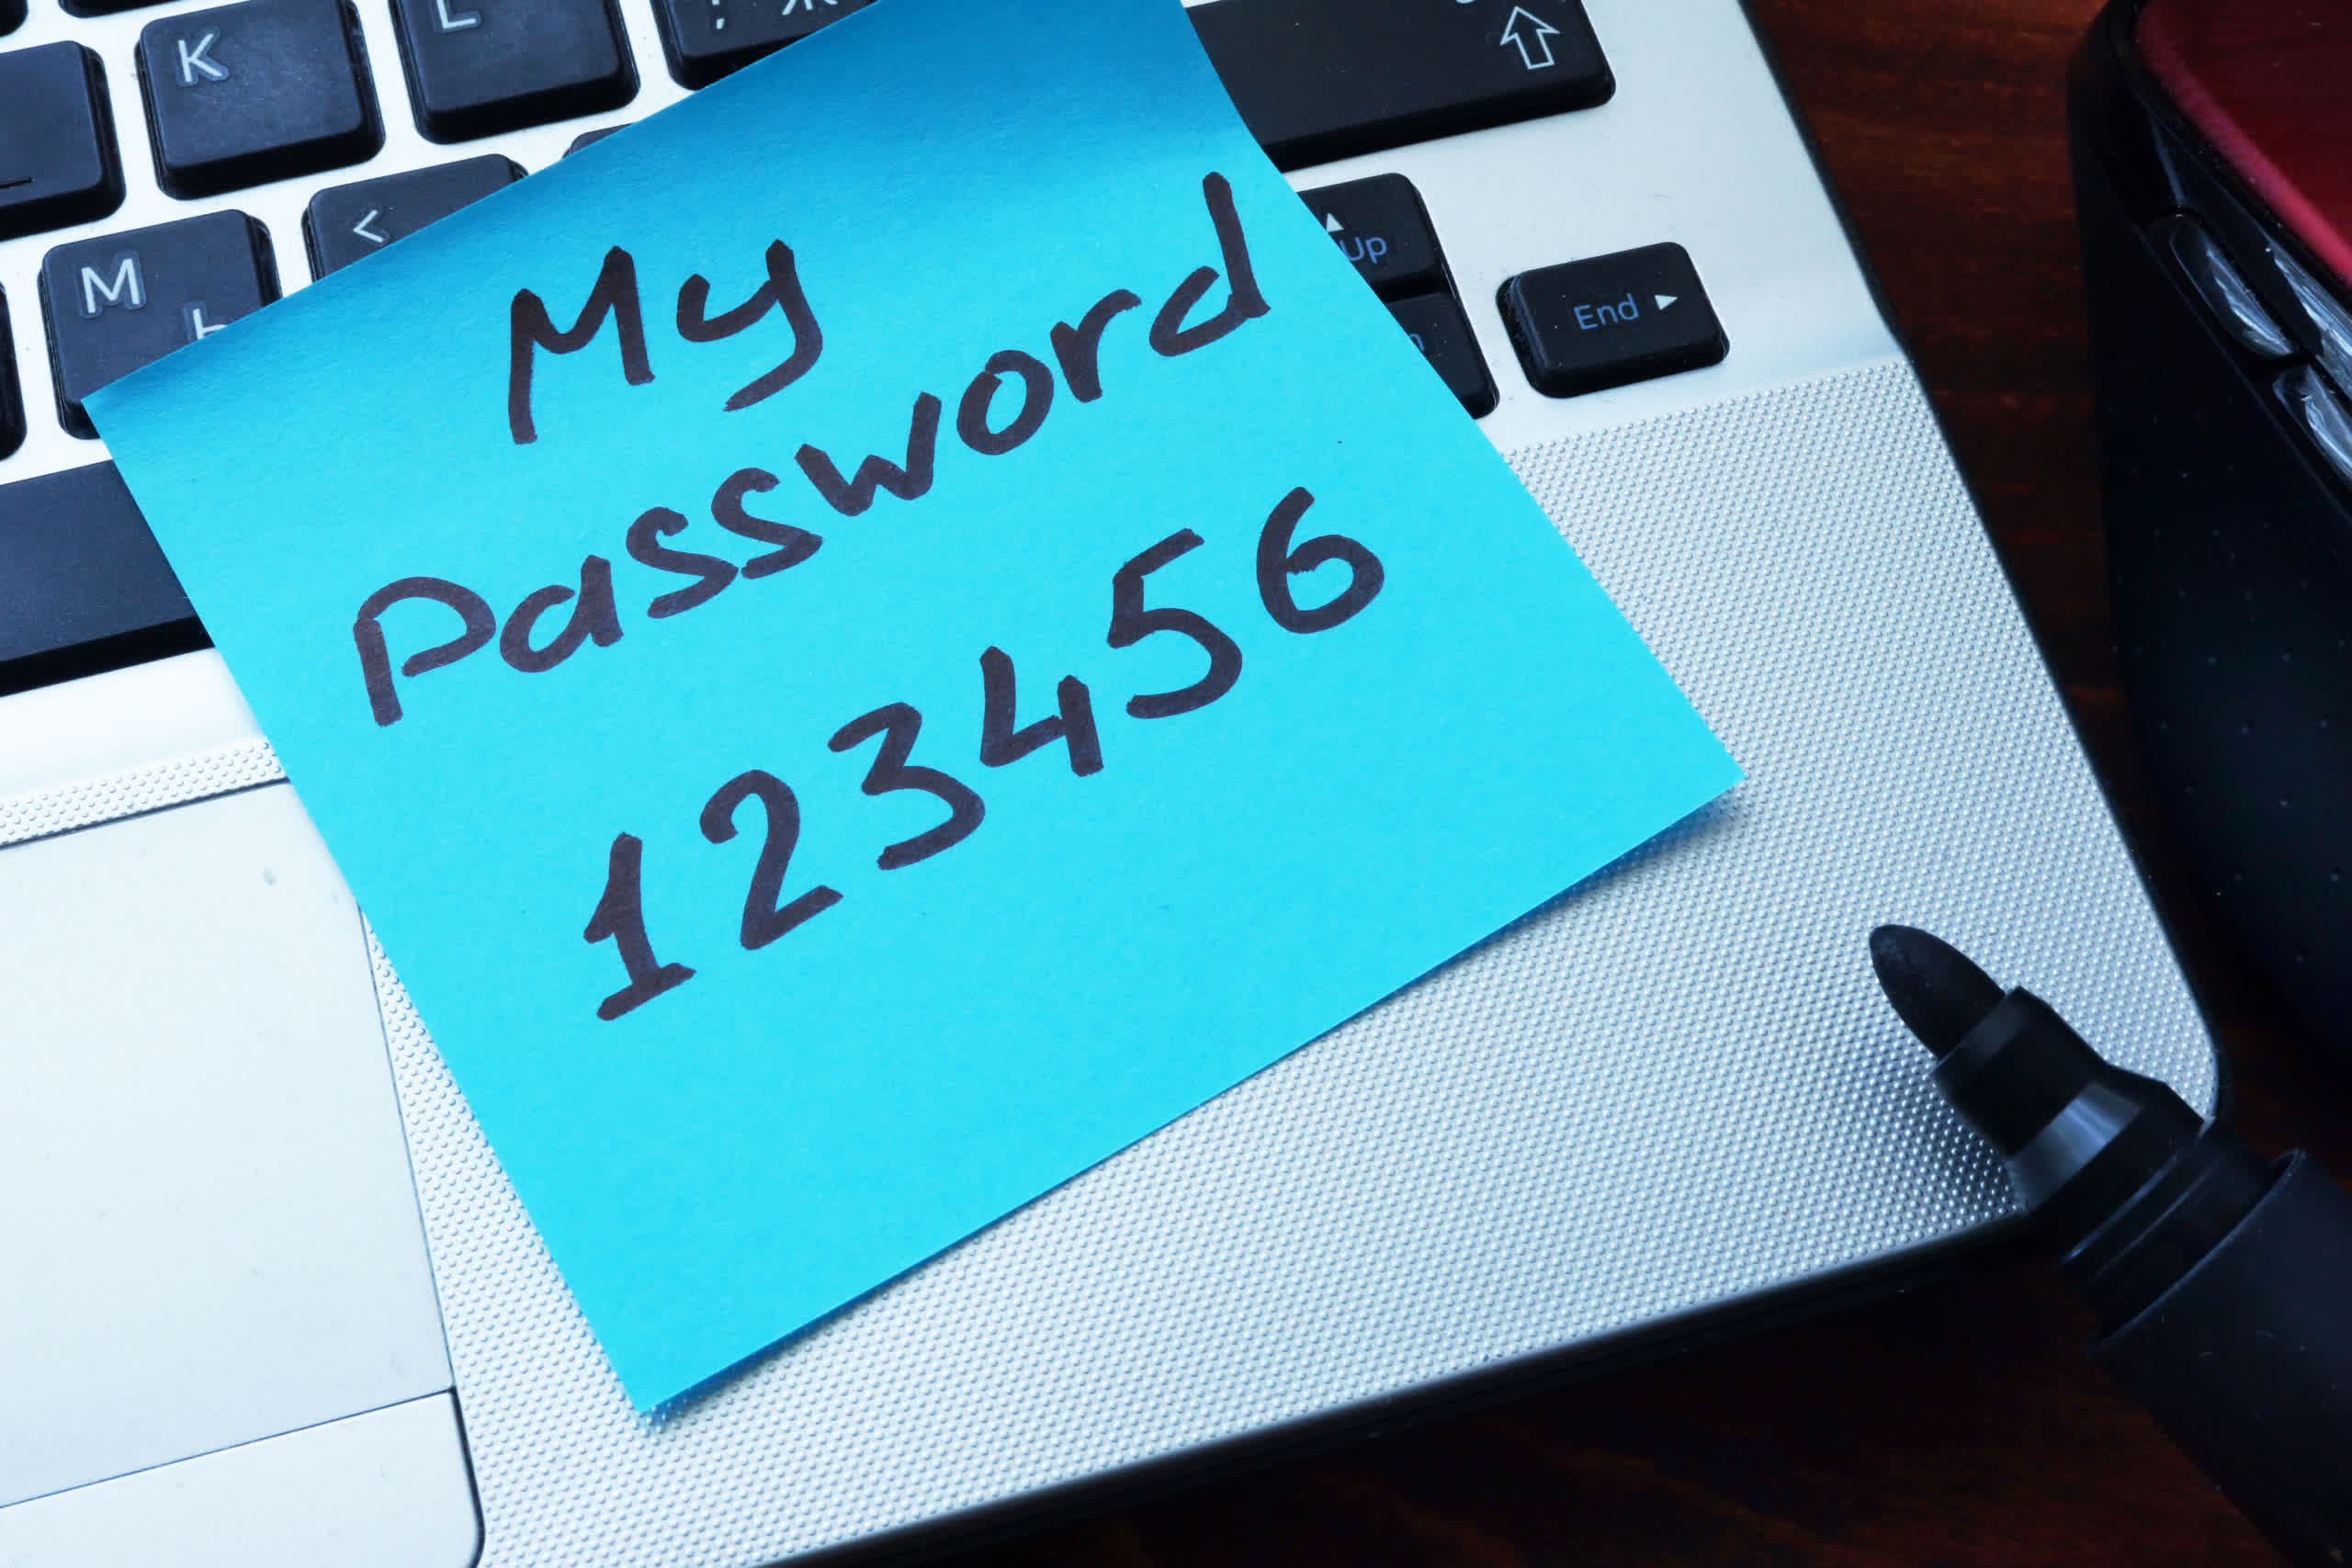 Password-based hacks have increased 74% over the last year